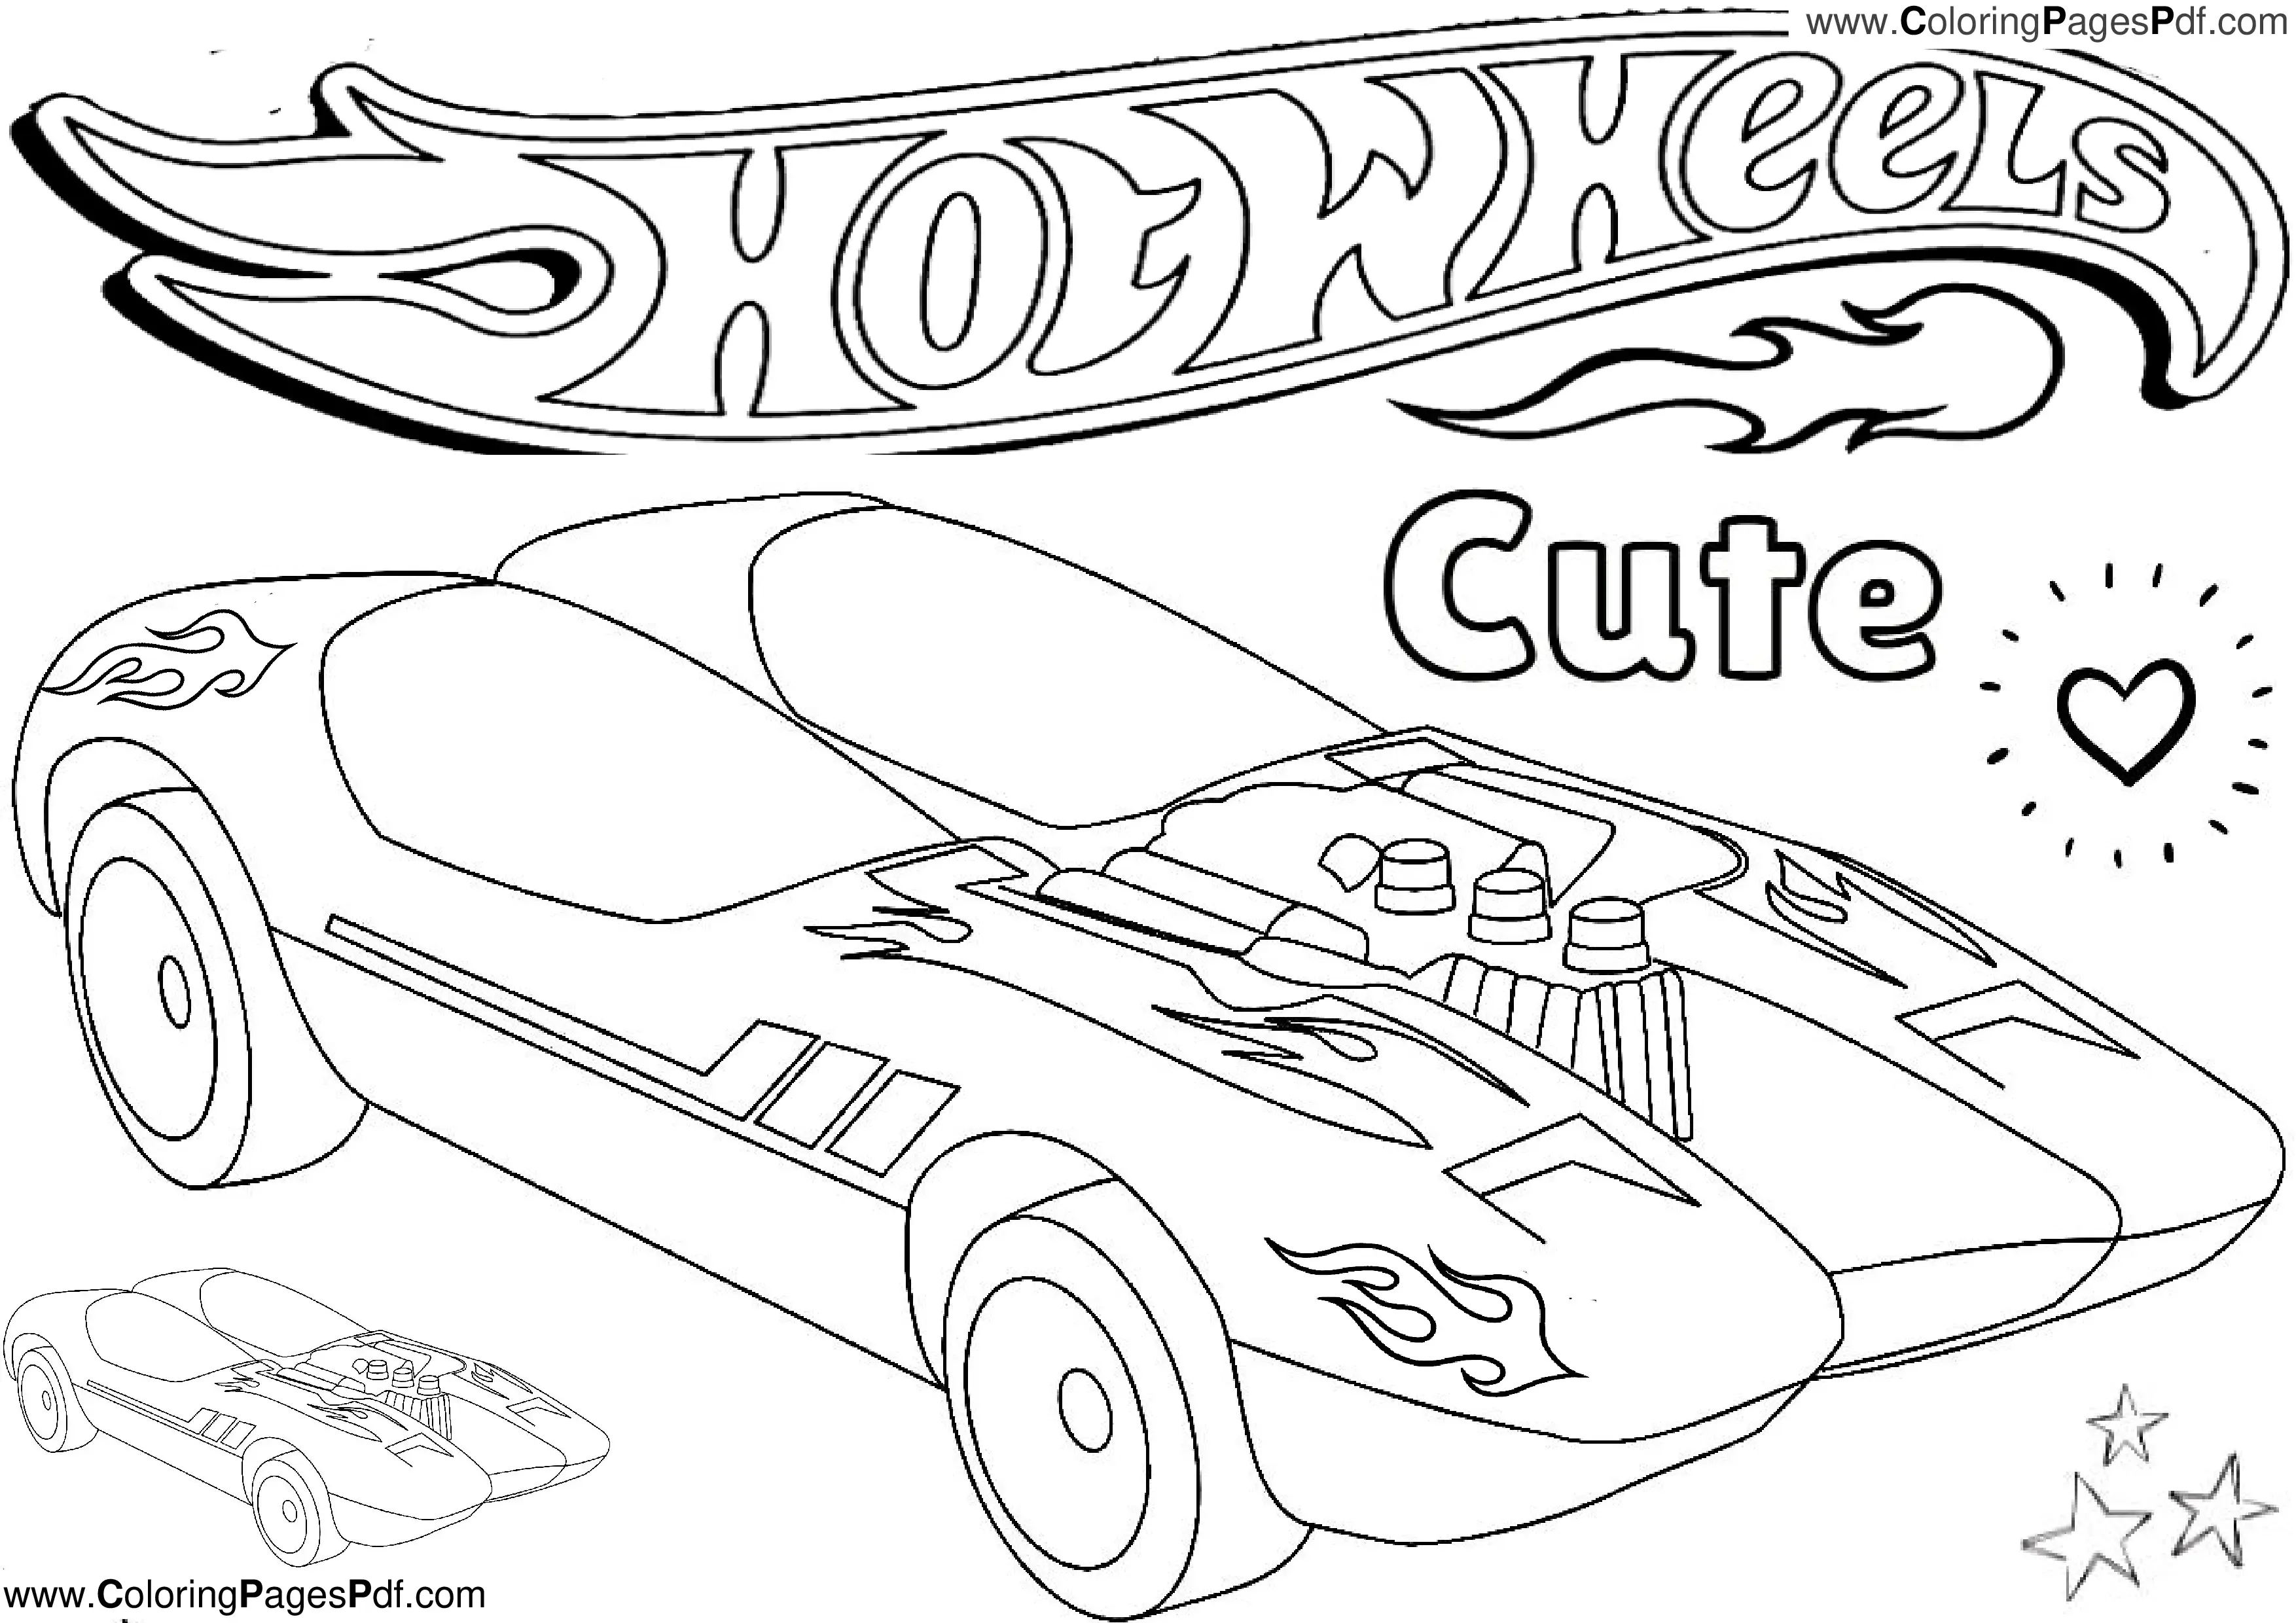 Hot wheels coloring pages for girls